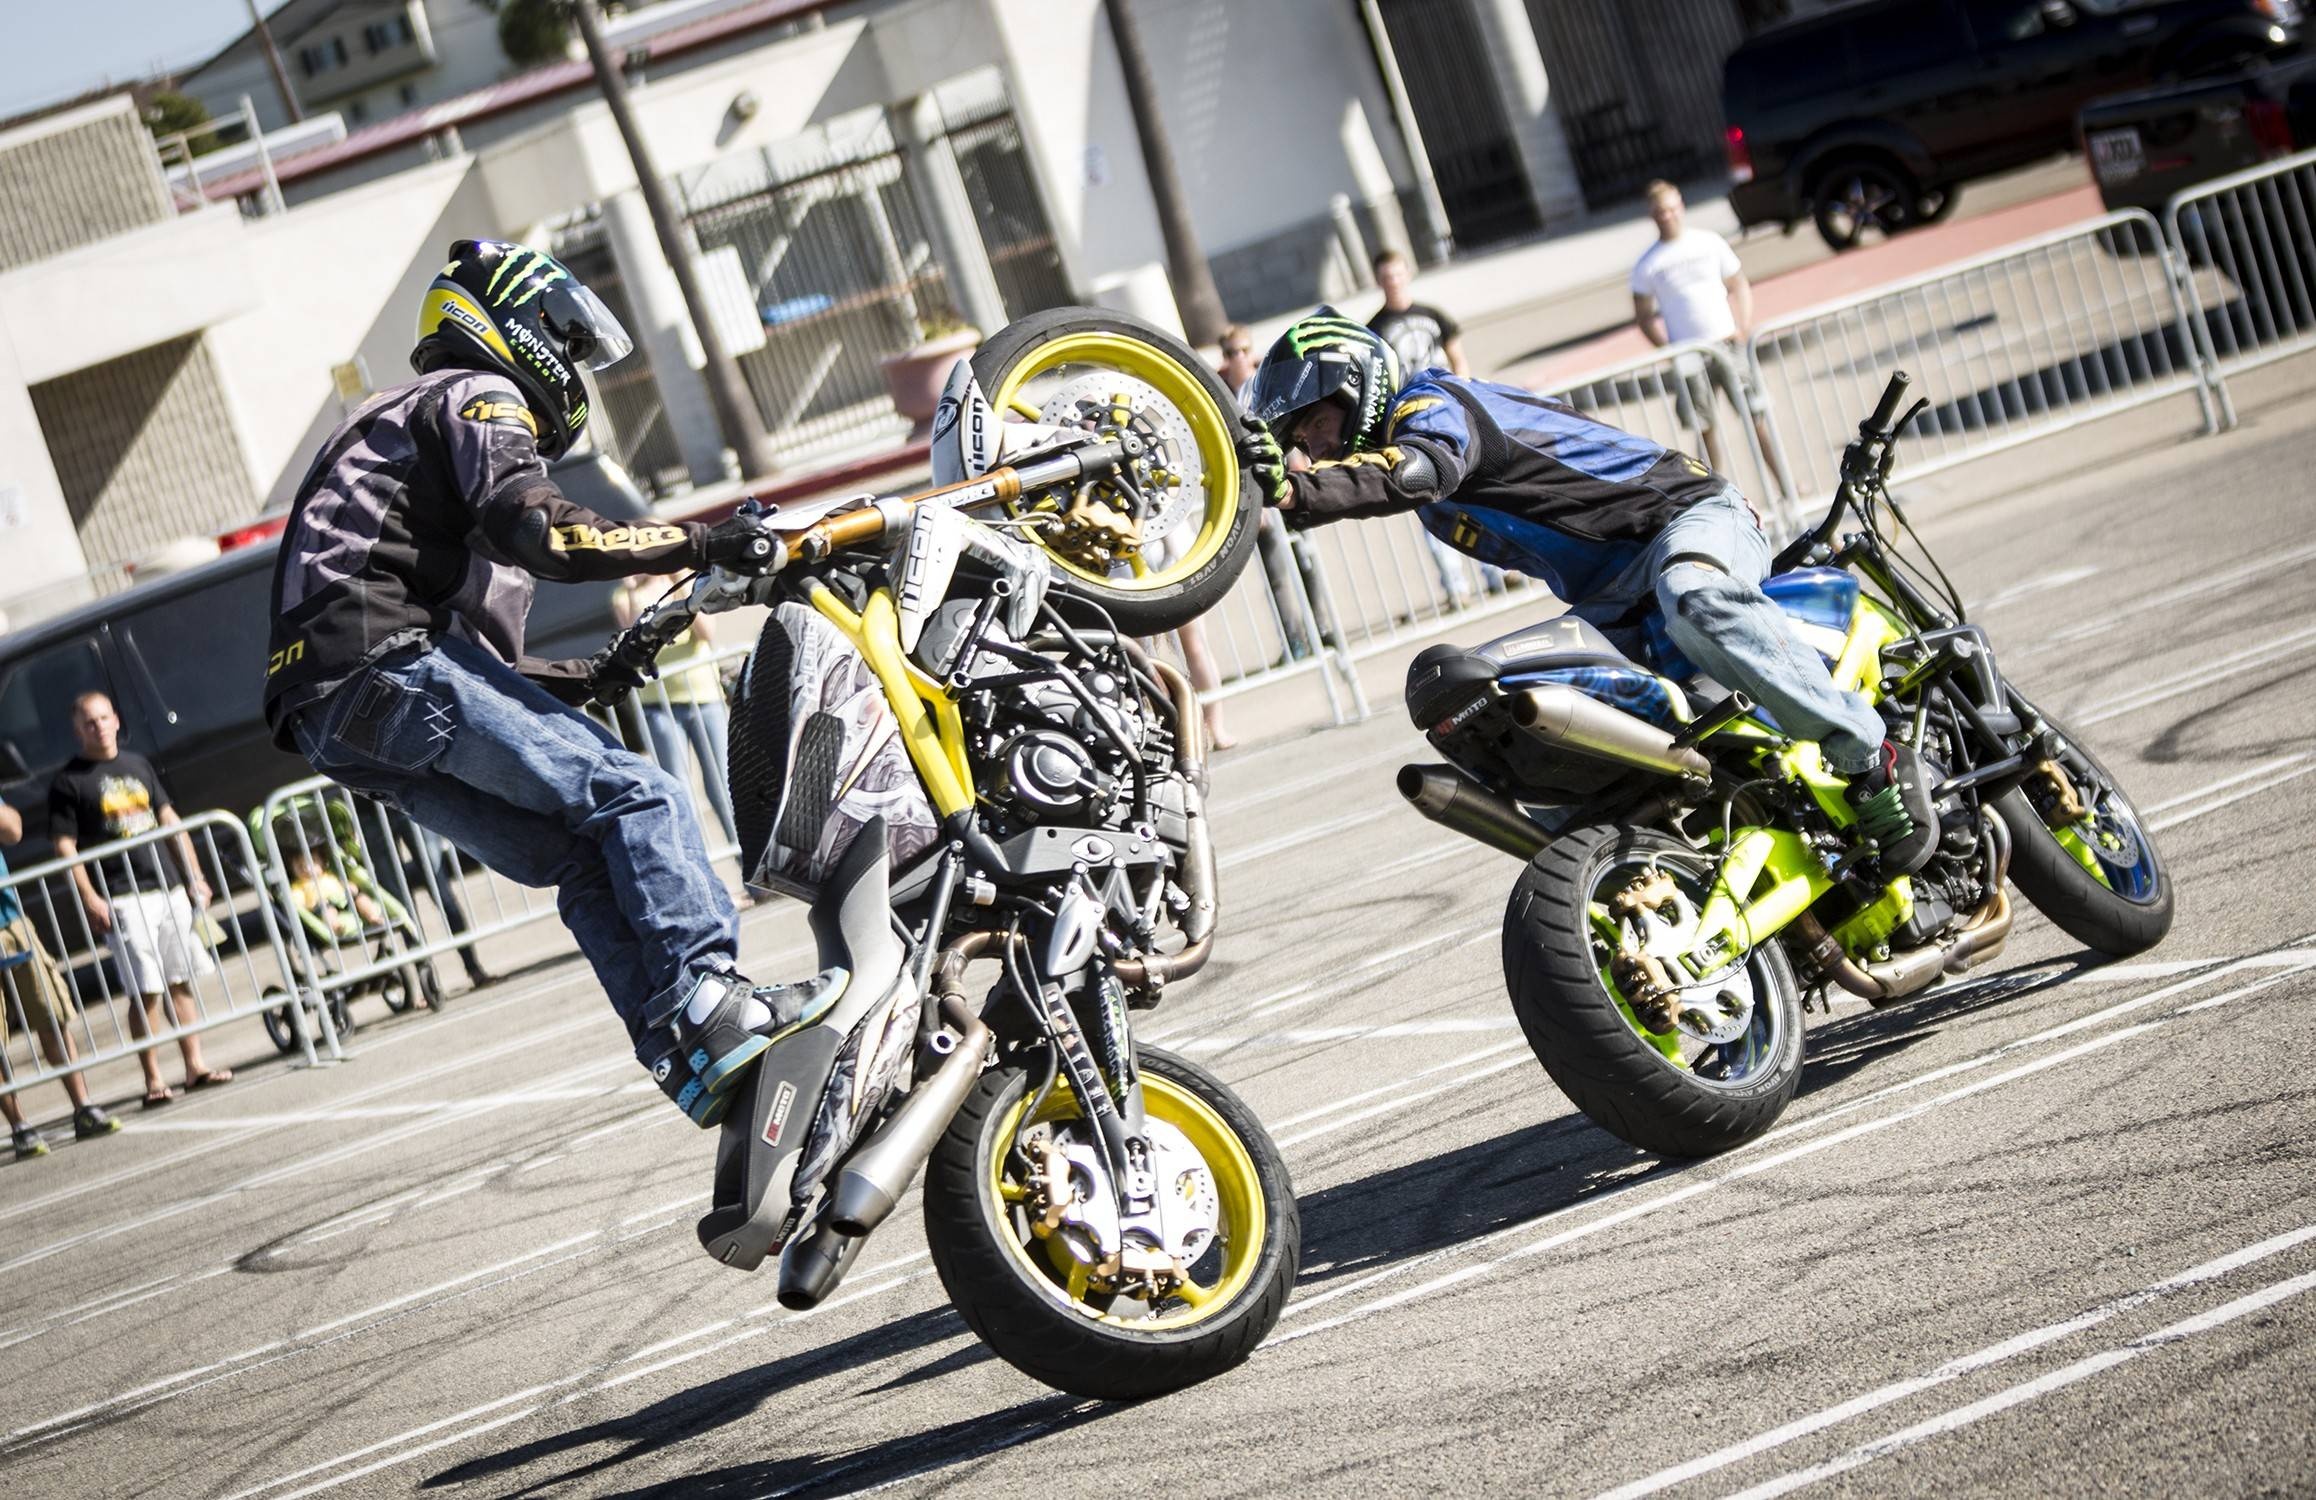 Stunt: Wheelstand and burnout, Sportbikes, Motorcycle stunting. 2320x1500 HD Background.